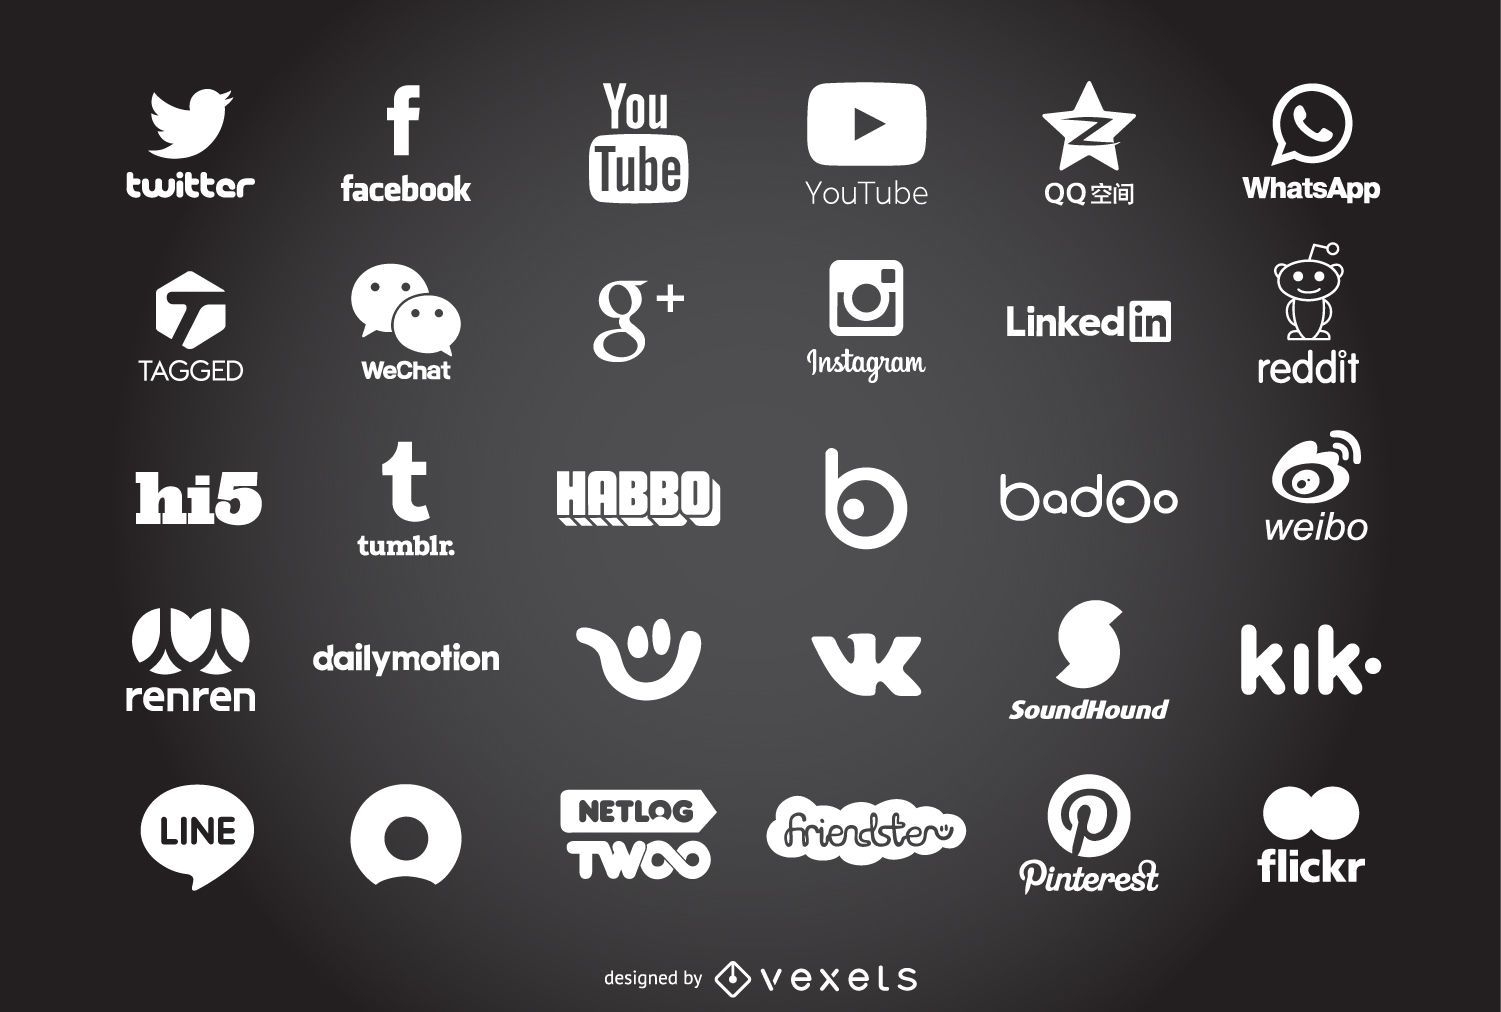 New popular social Network icons and logos